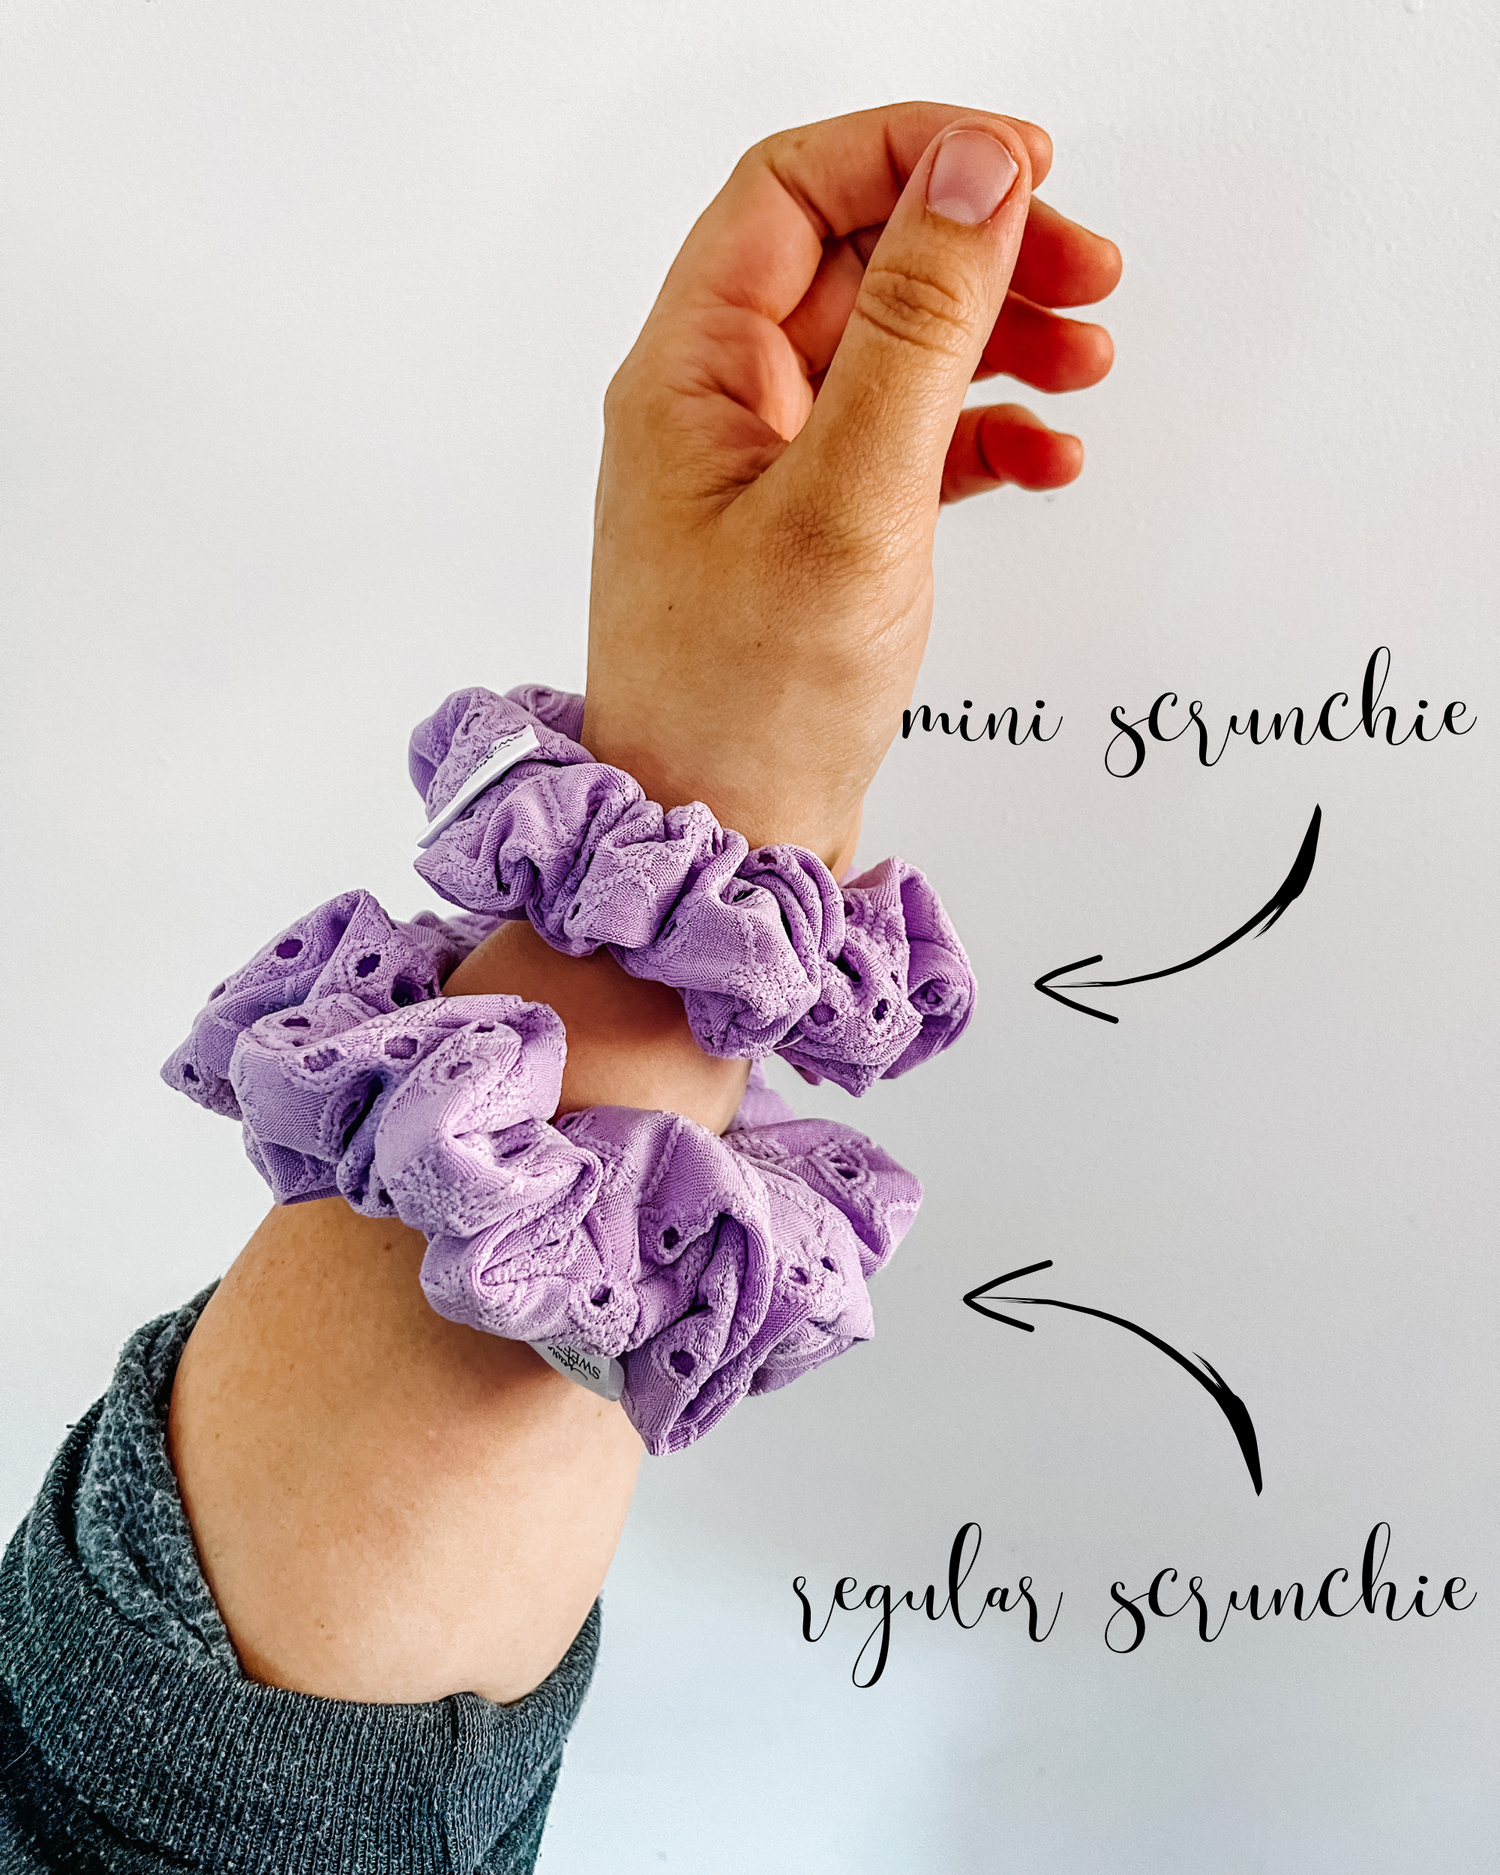 Retro Mouse Scrunchie  Sewing Sweethearts   